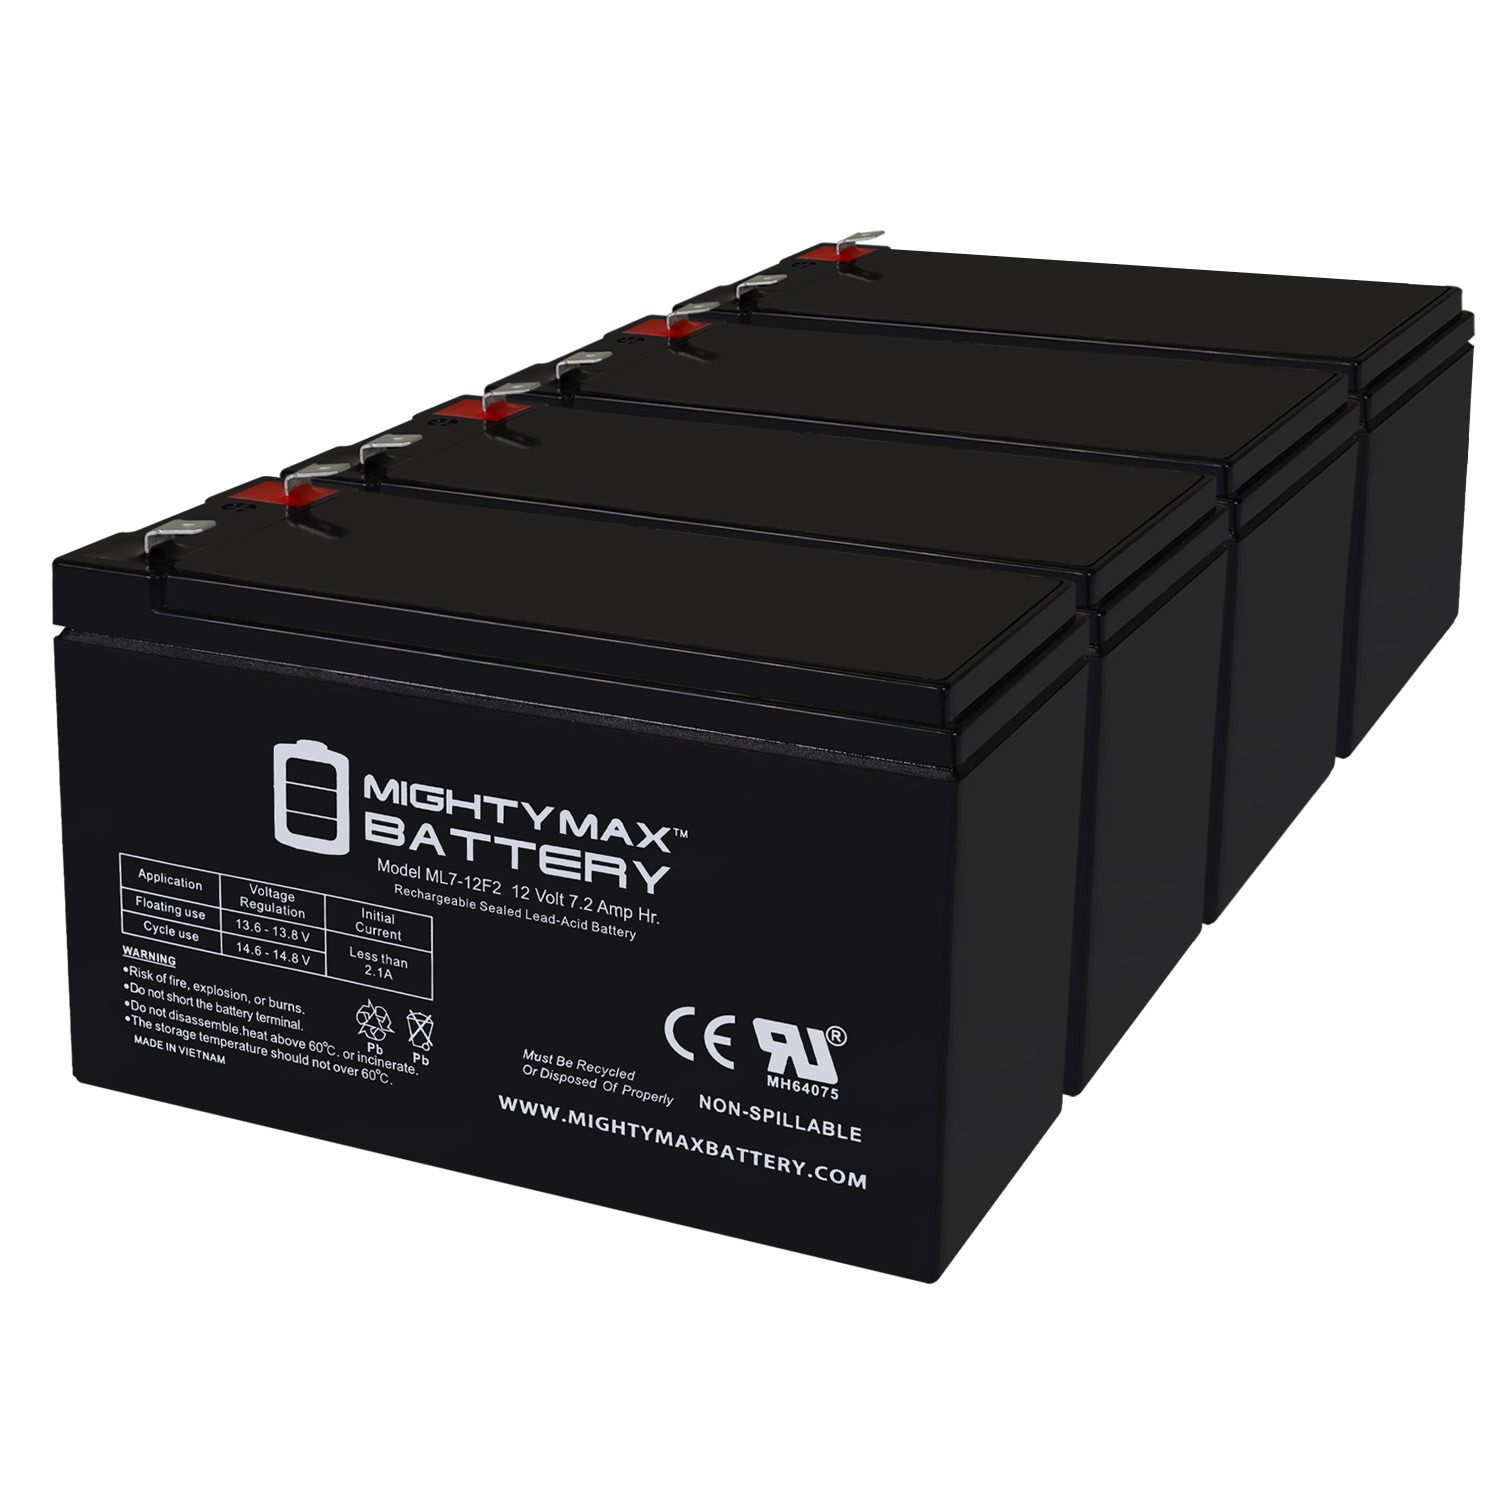 12V 7Ah F2 Replacement Battery for Lowrance Elite-4x Fishfinder - 4 Pack